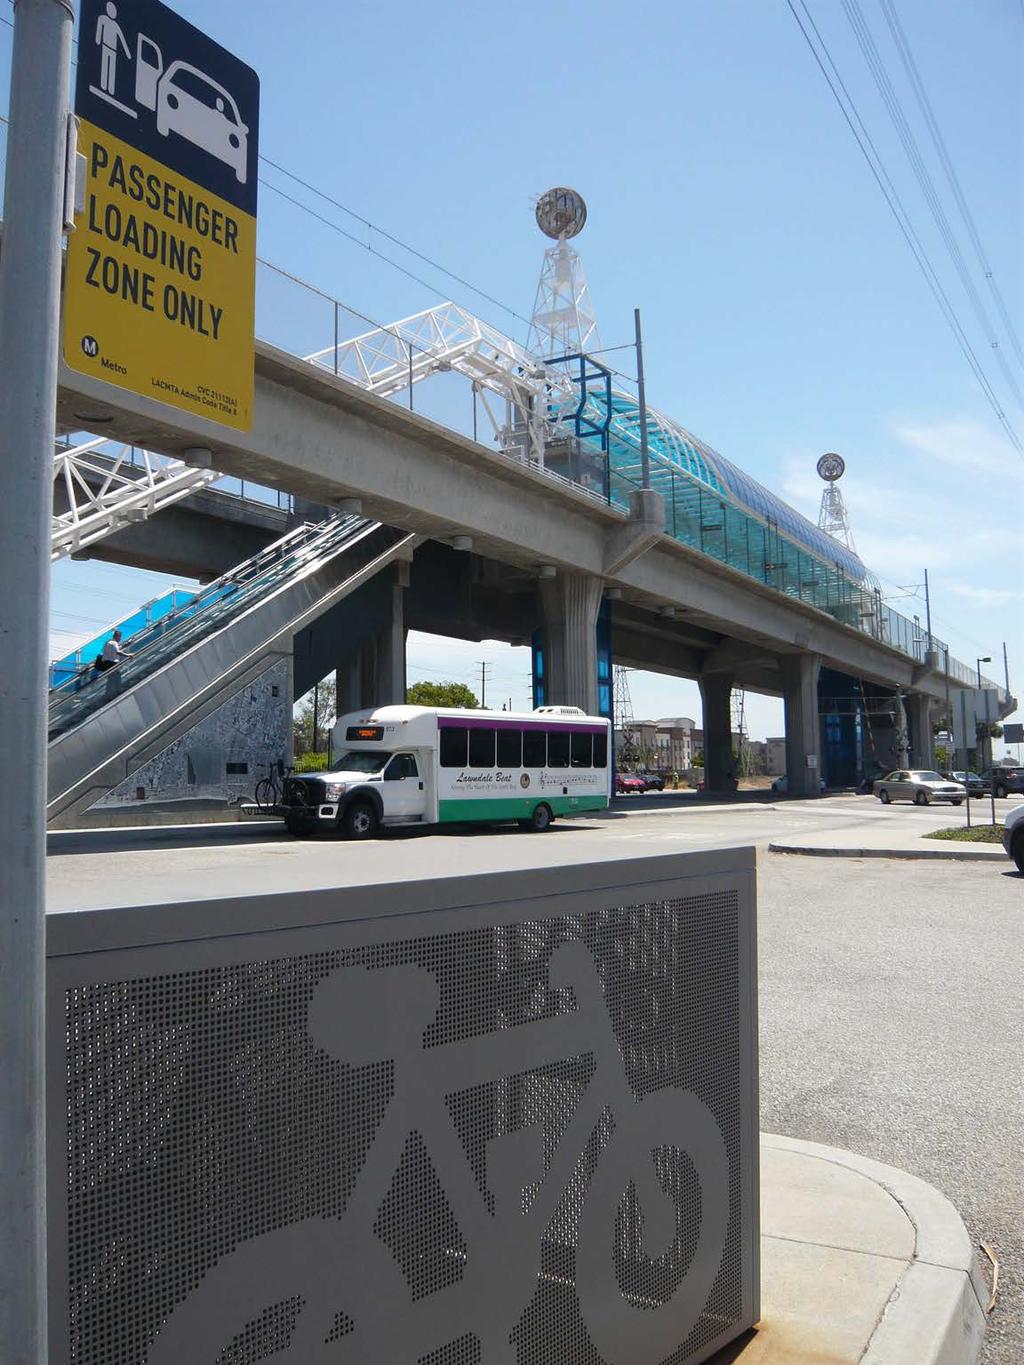 AVIATION BOULEVARD LIVING STREET Provide travel choices for users of all ages and abilities kids, older individuals and people with disabilities Transit by choice and transit by circumstances Connect